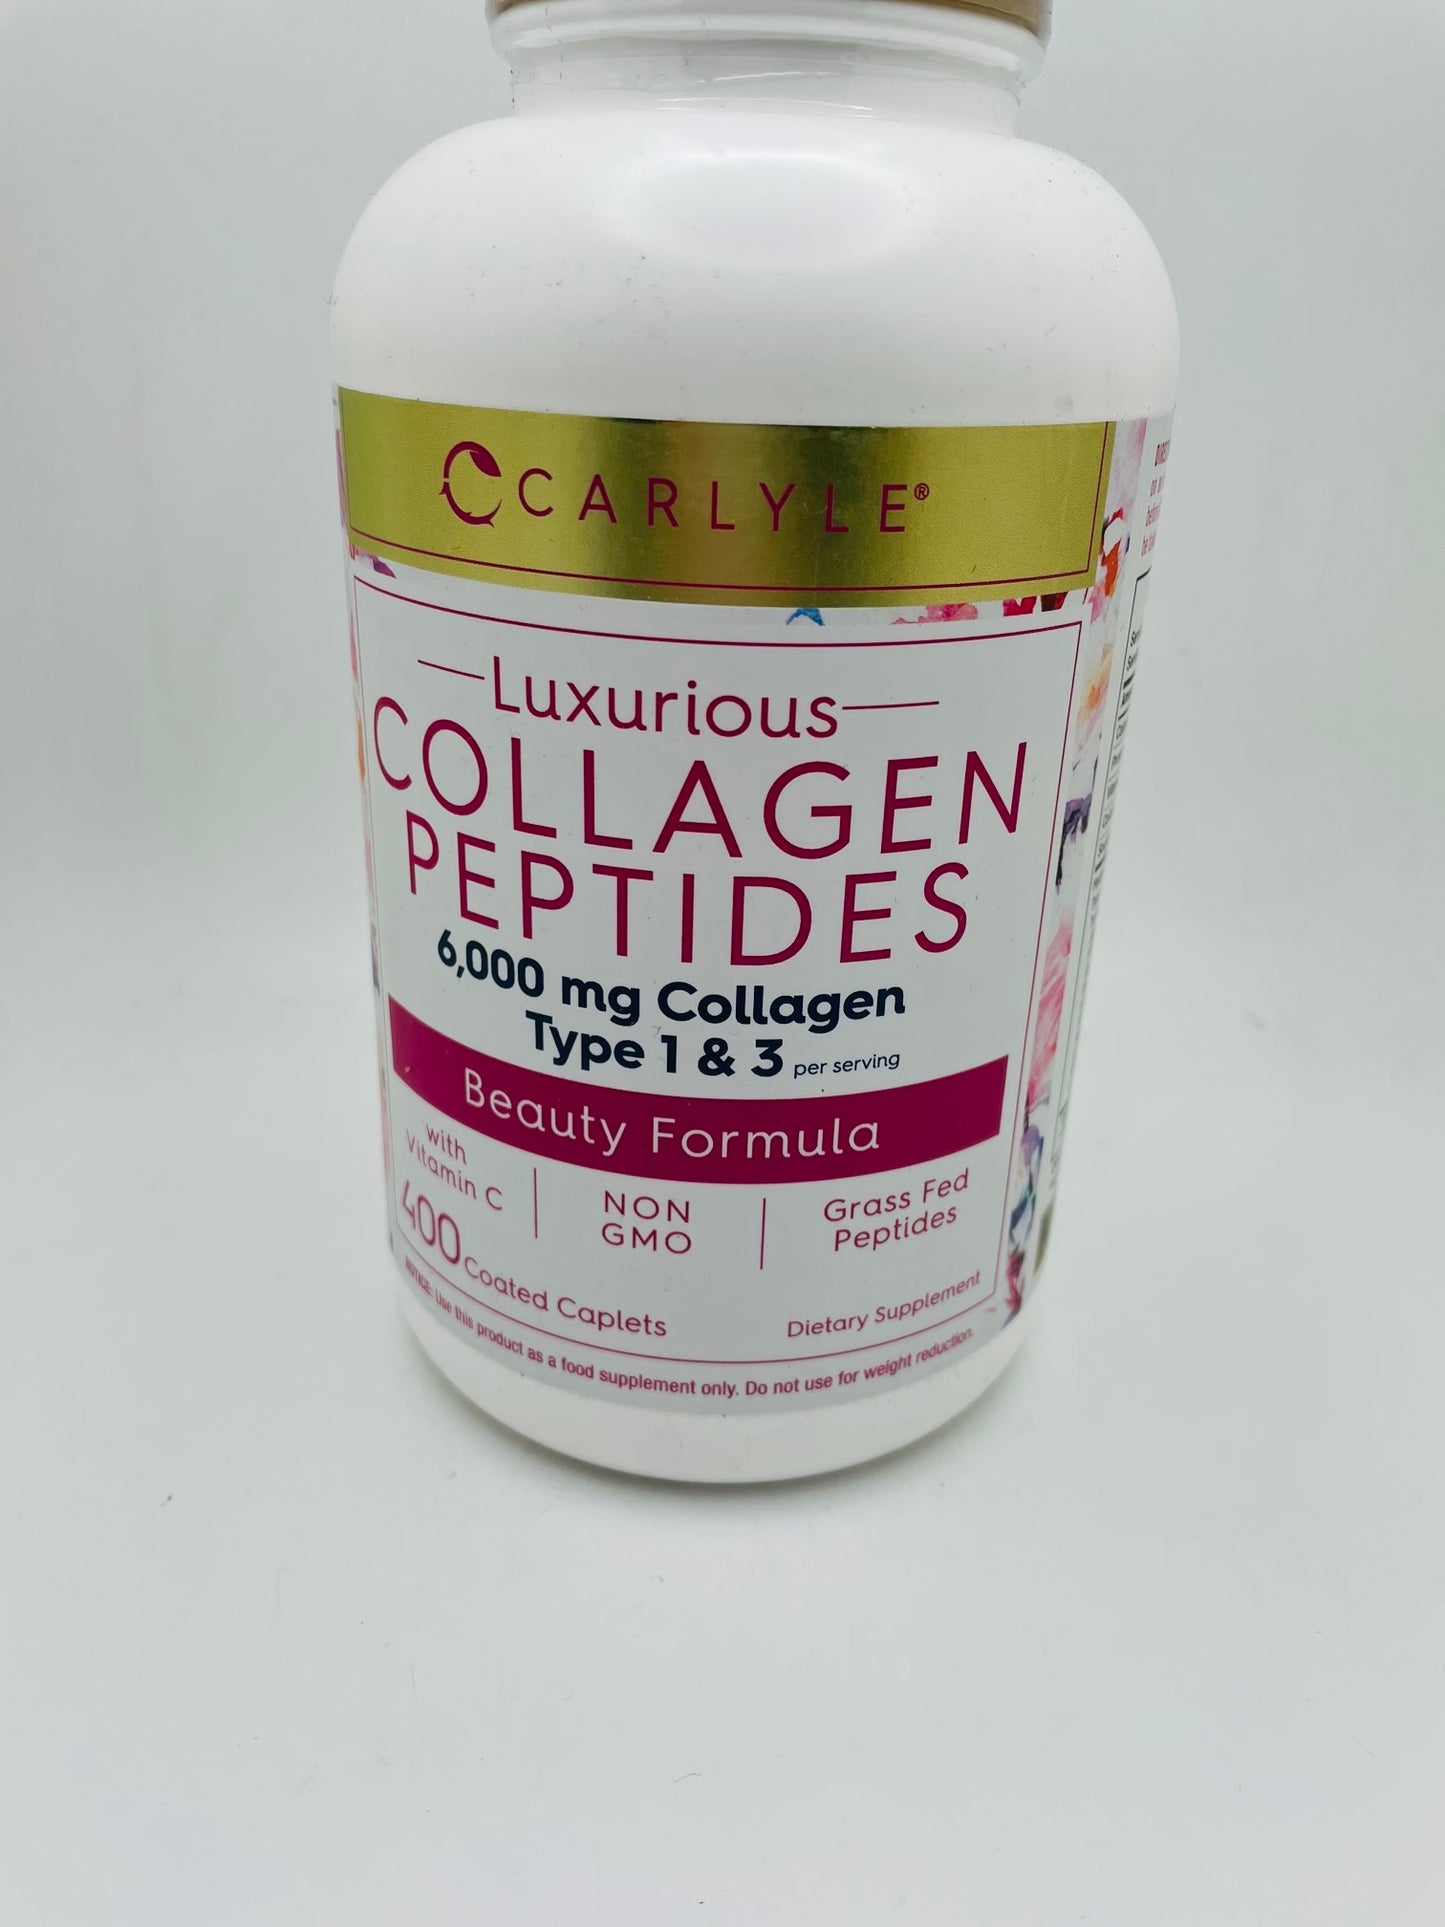 Carlyle collagen peptides